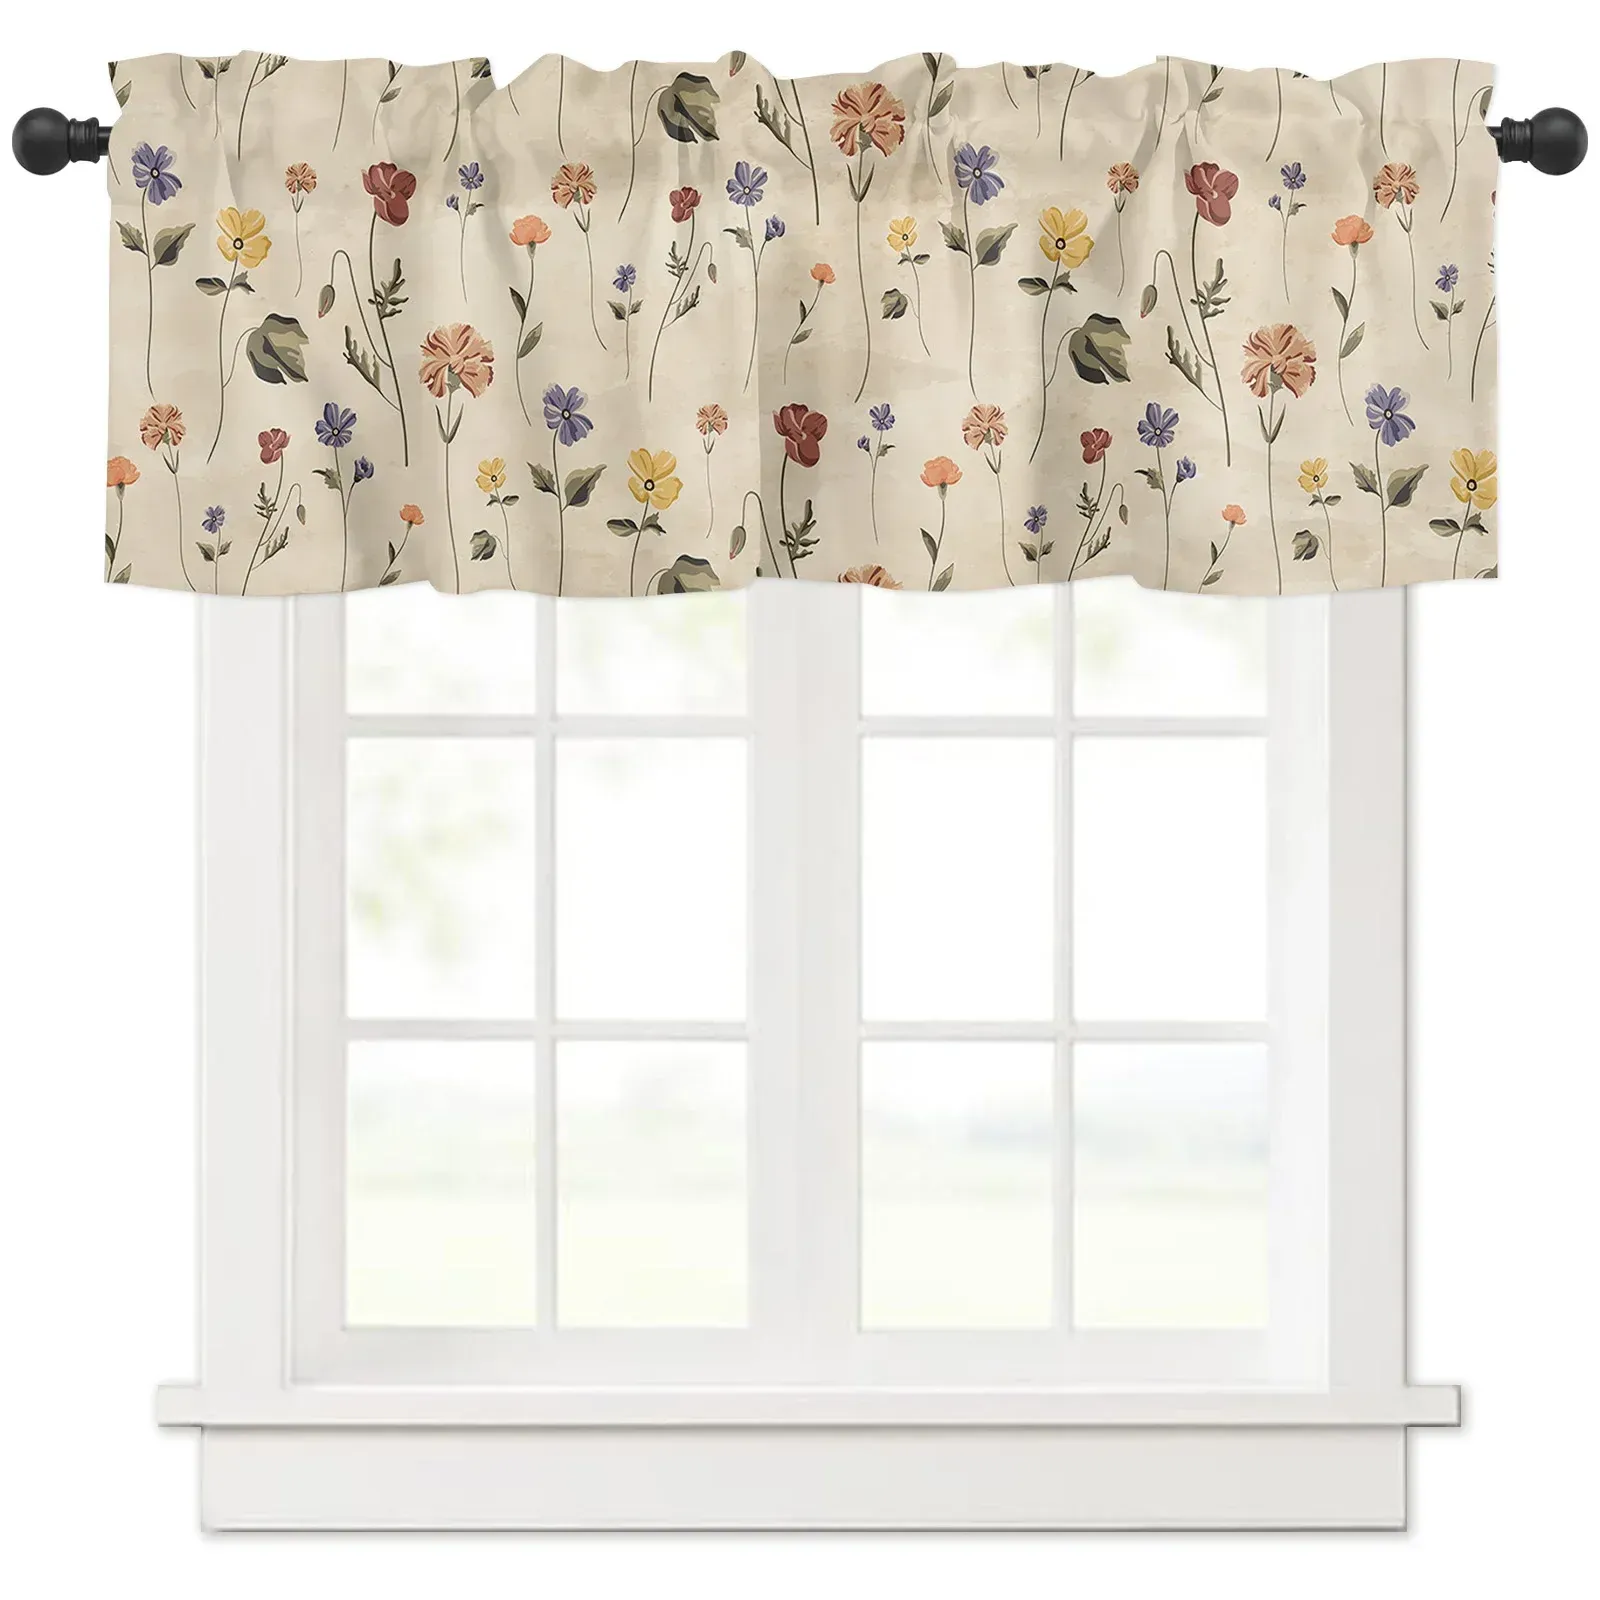 Curtains Retro Floral Wildflowers Kitchen Window Curtains Home Decoration Short Curtain for Living Room Bedroom Small Drapes Cortinas